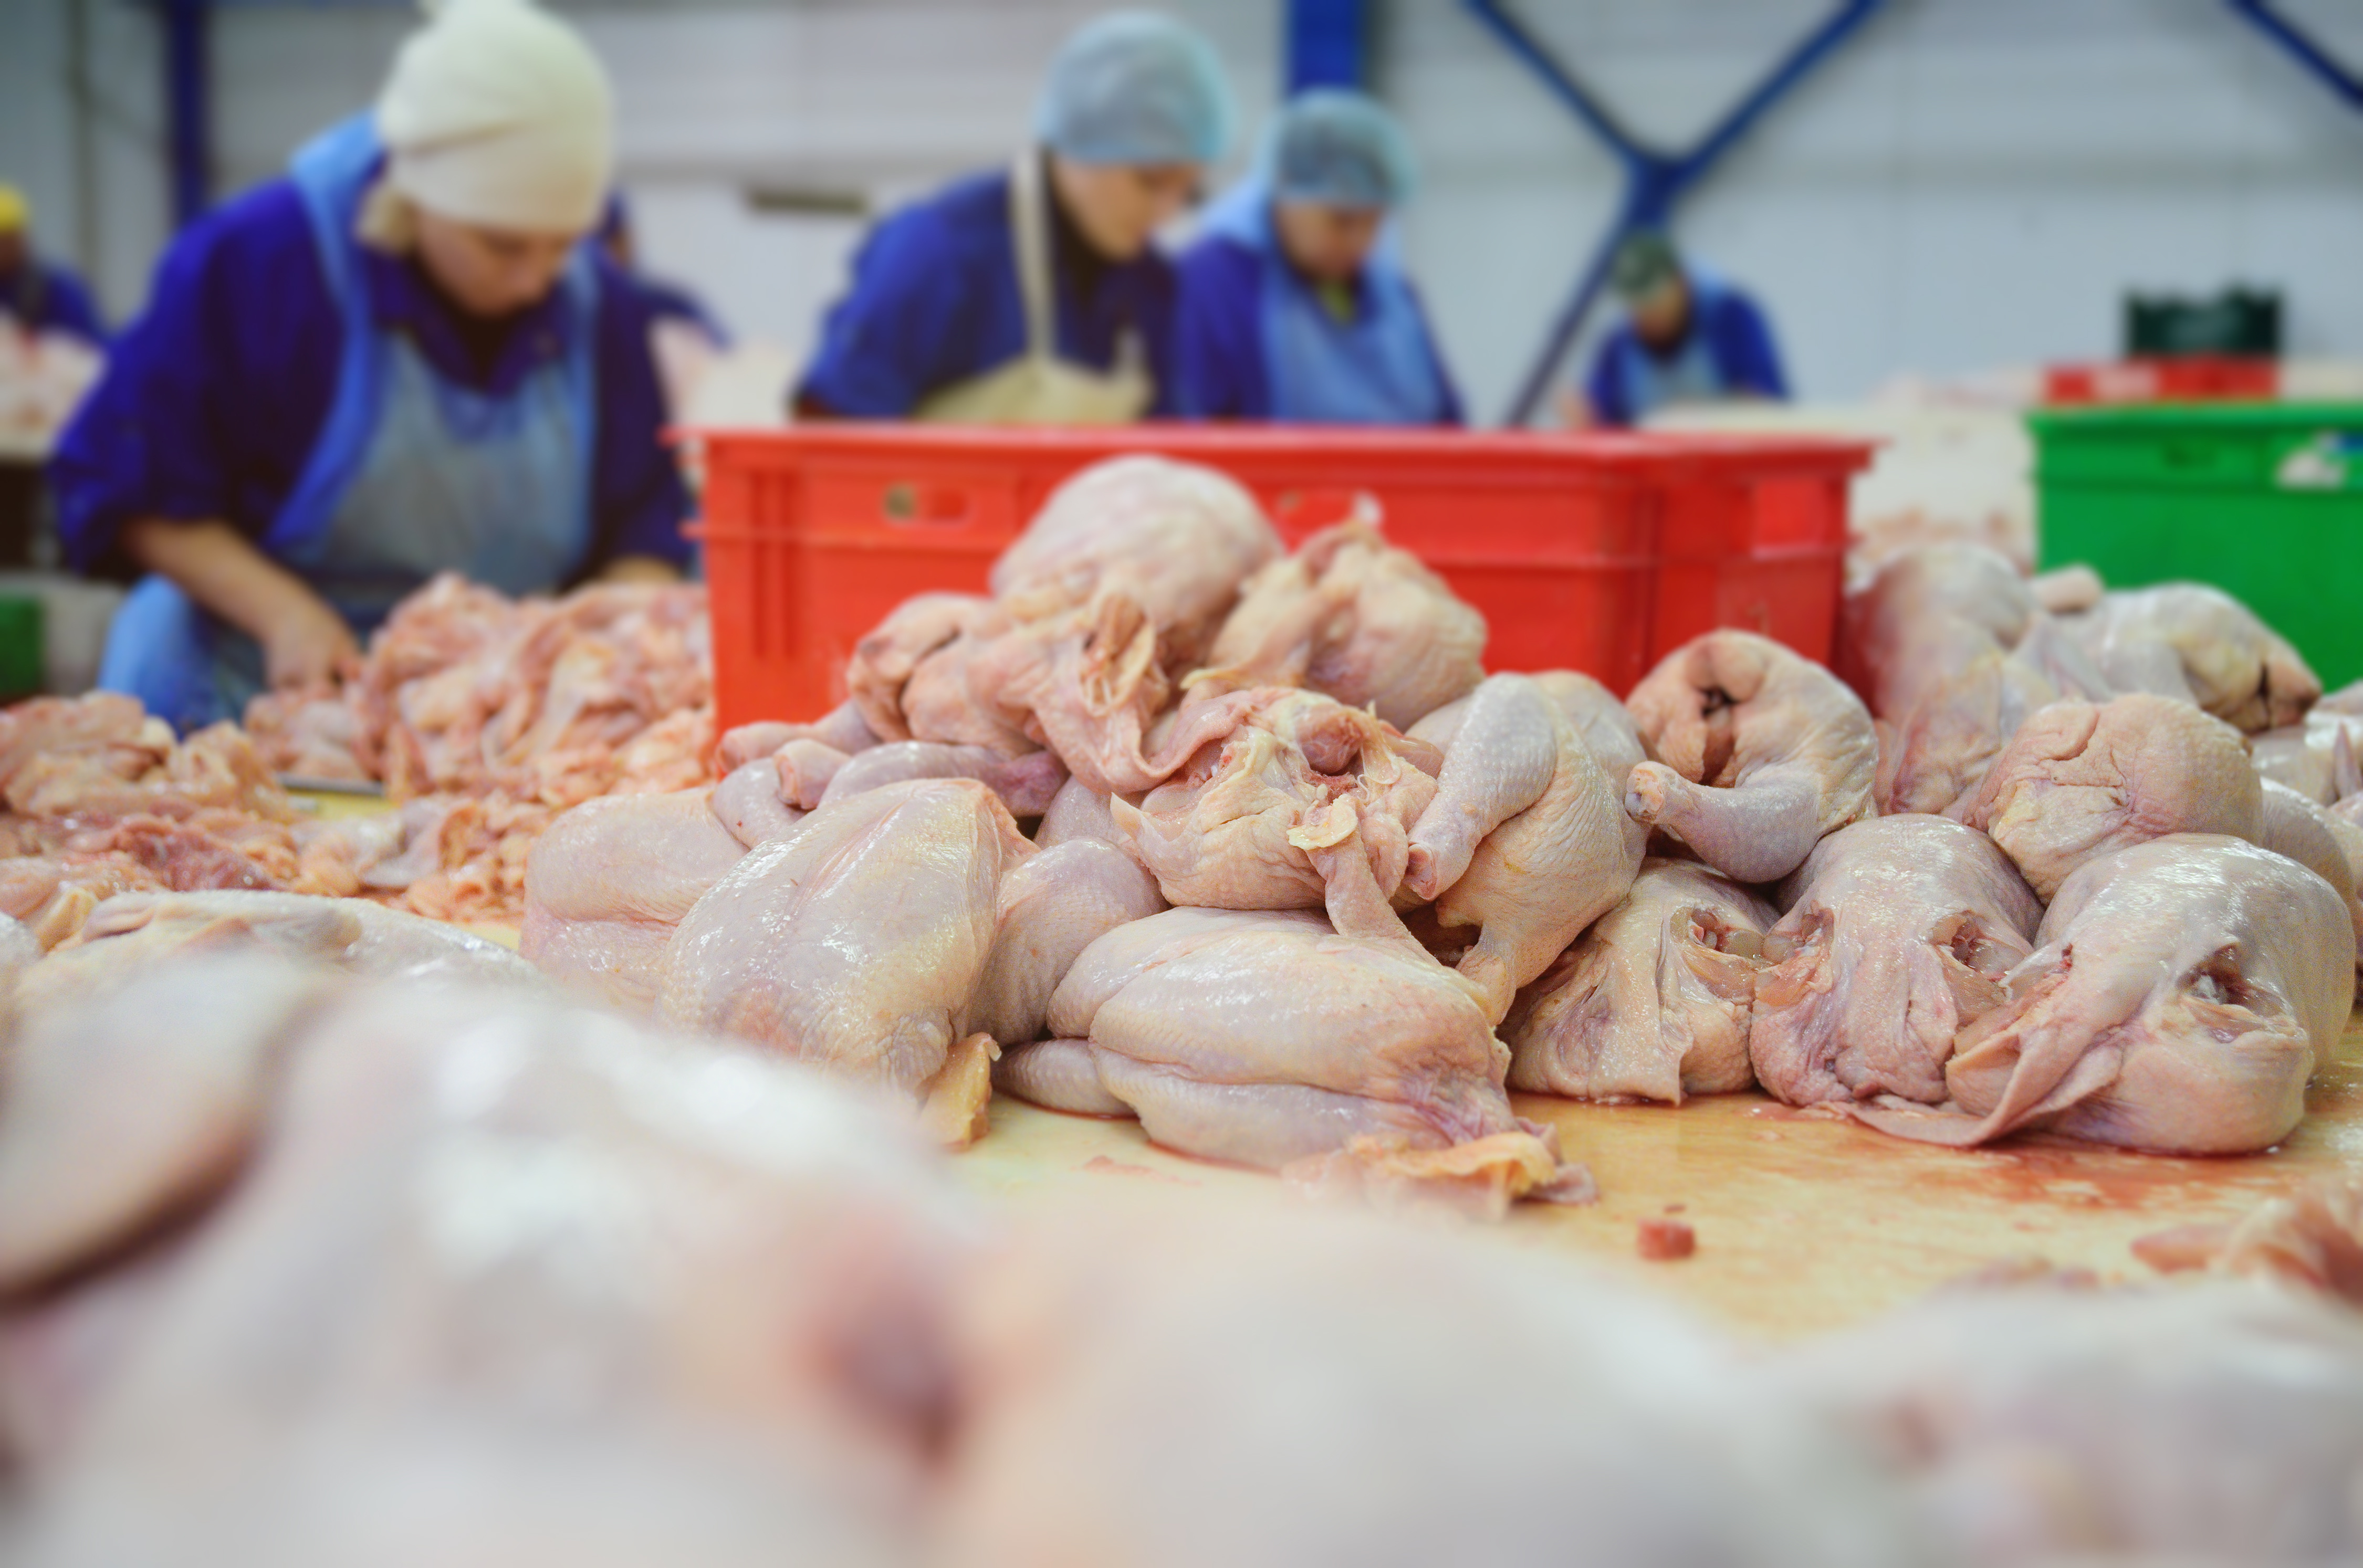 Women cutting poultry carcasses into thighs and legs